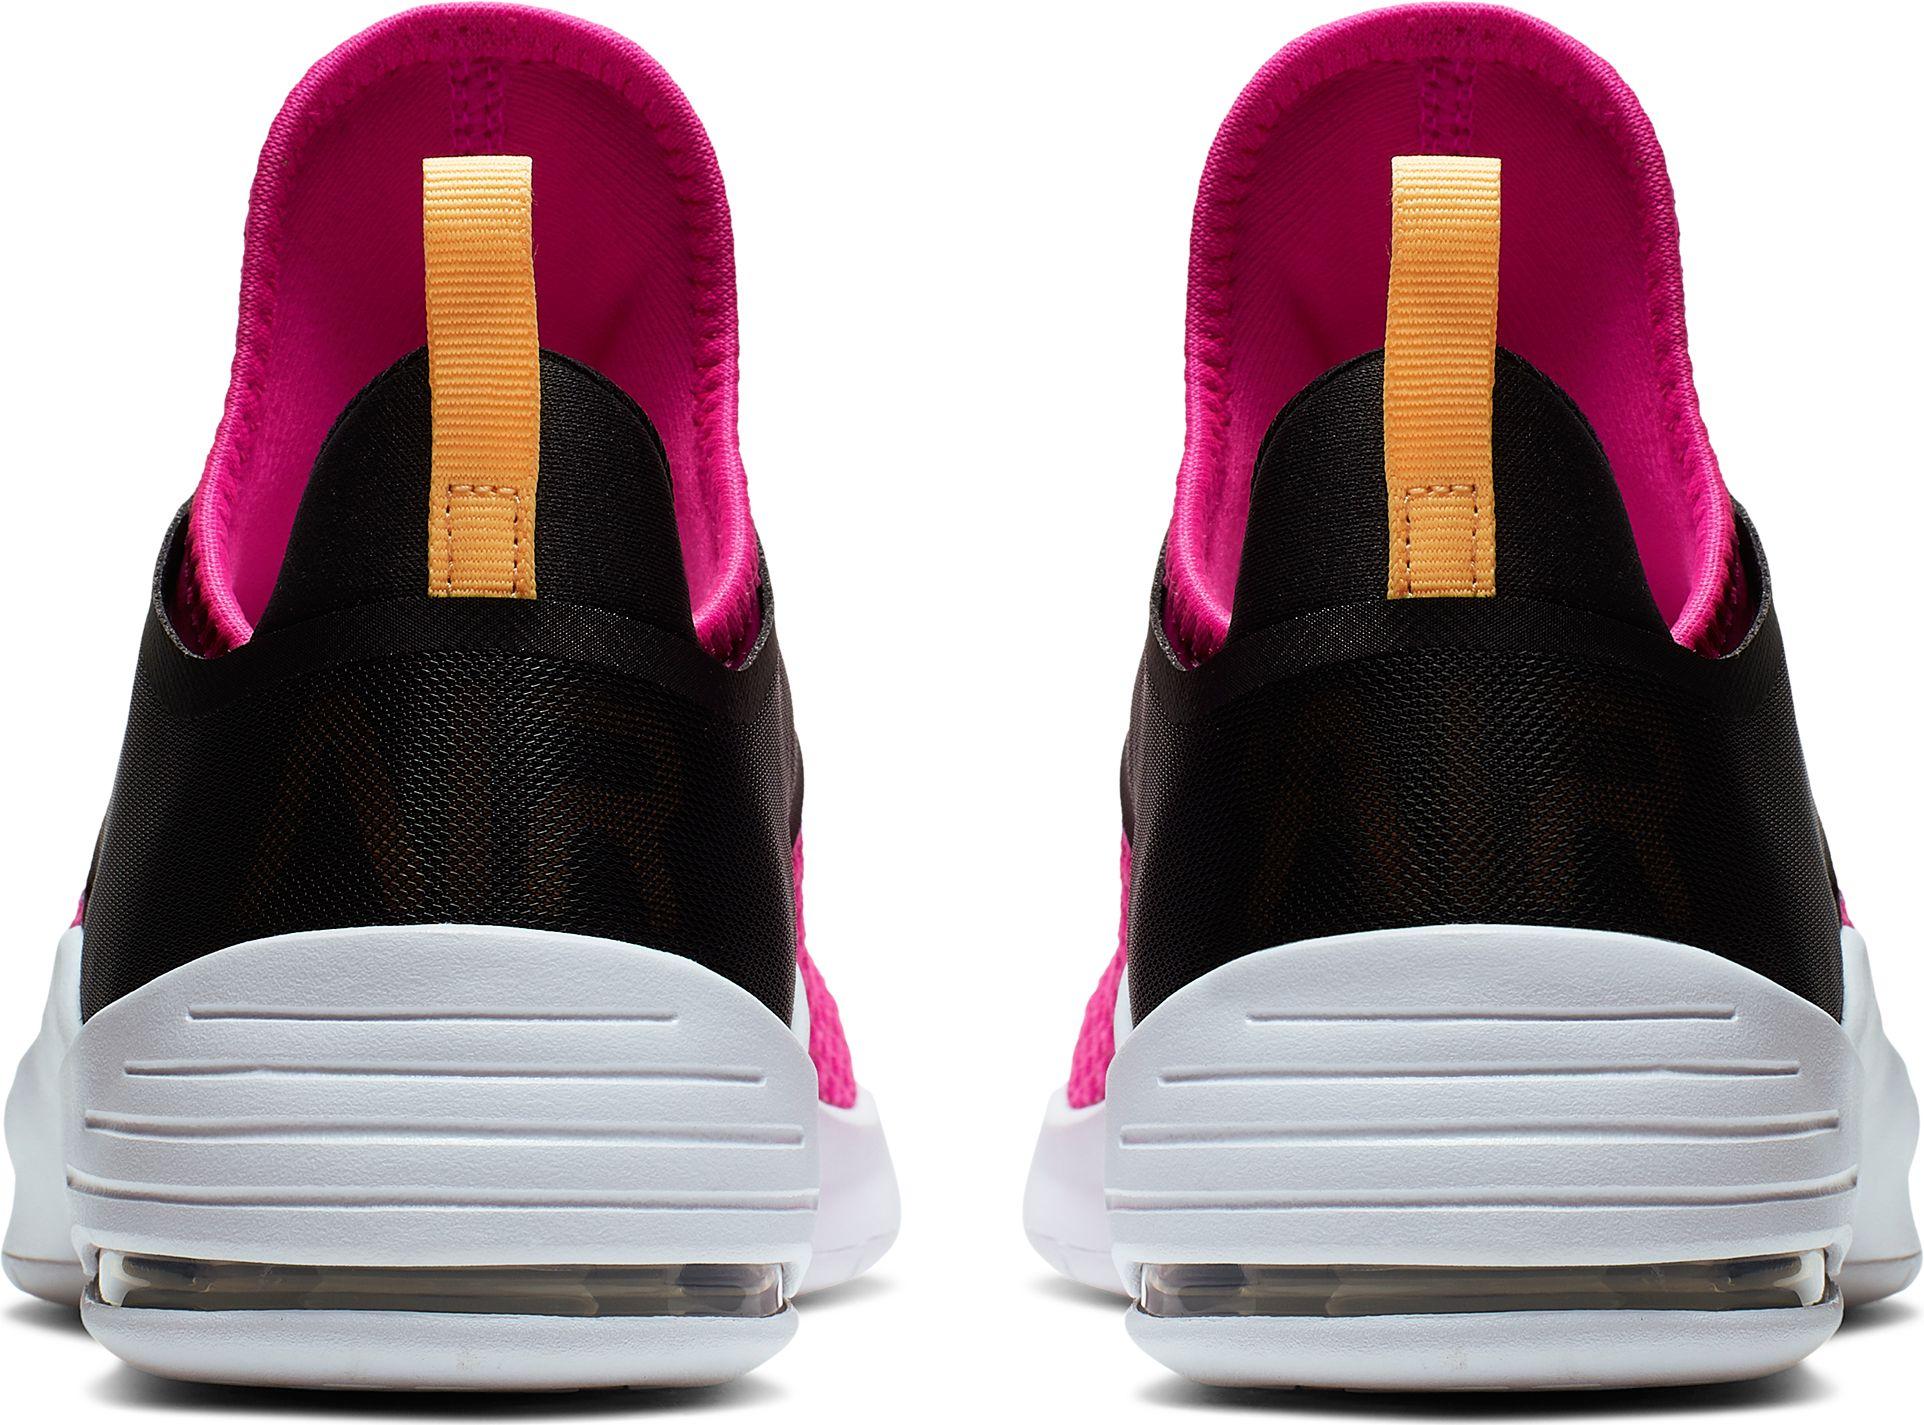 Nike Air Max Bella Tr 2 Training Shoe in Pink/Black/White (Pink) - Lyst